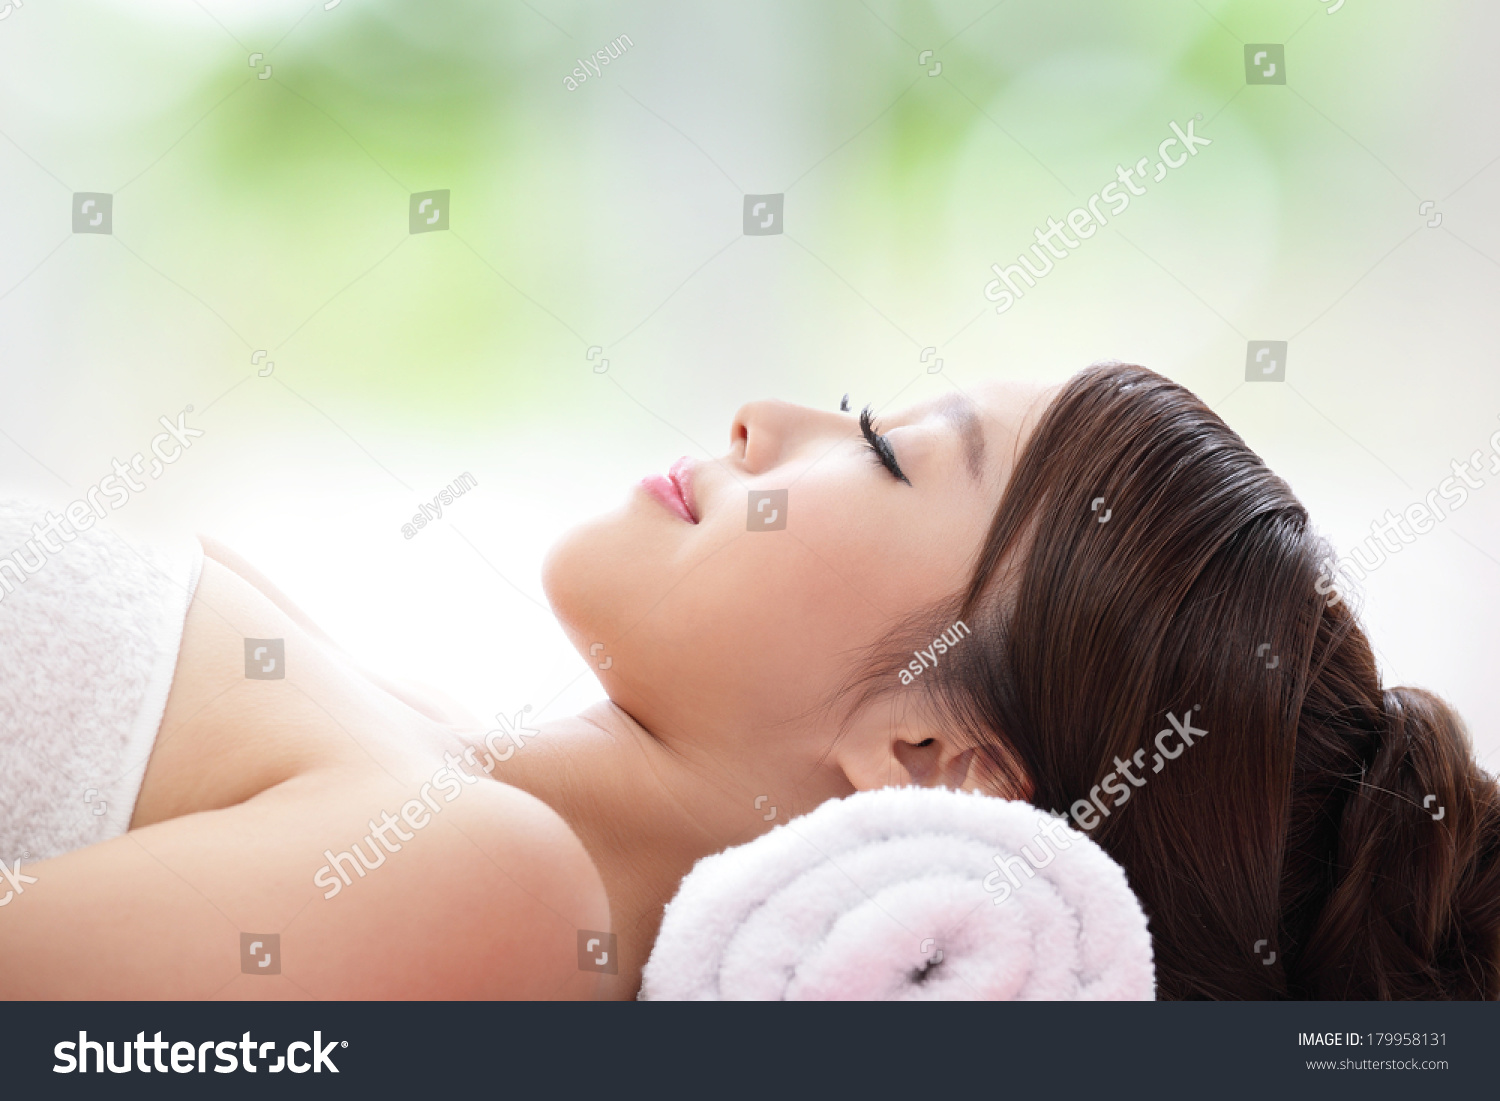 Relax Beautiful Woman Face Receiving Massage With Nature Green